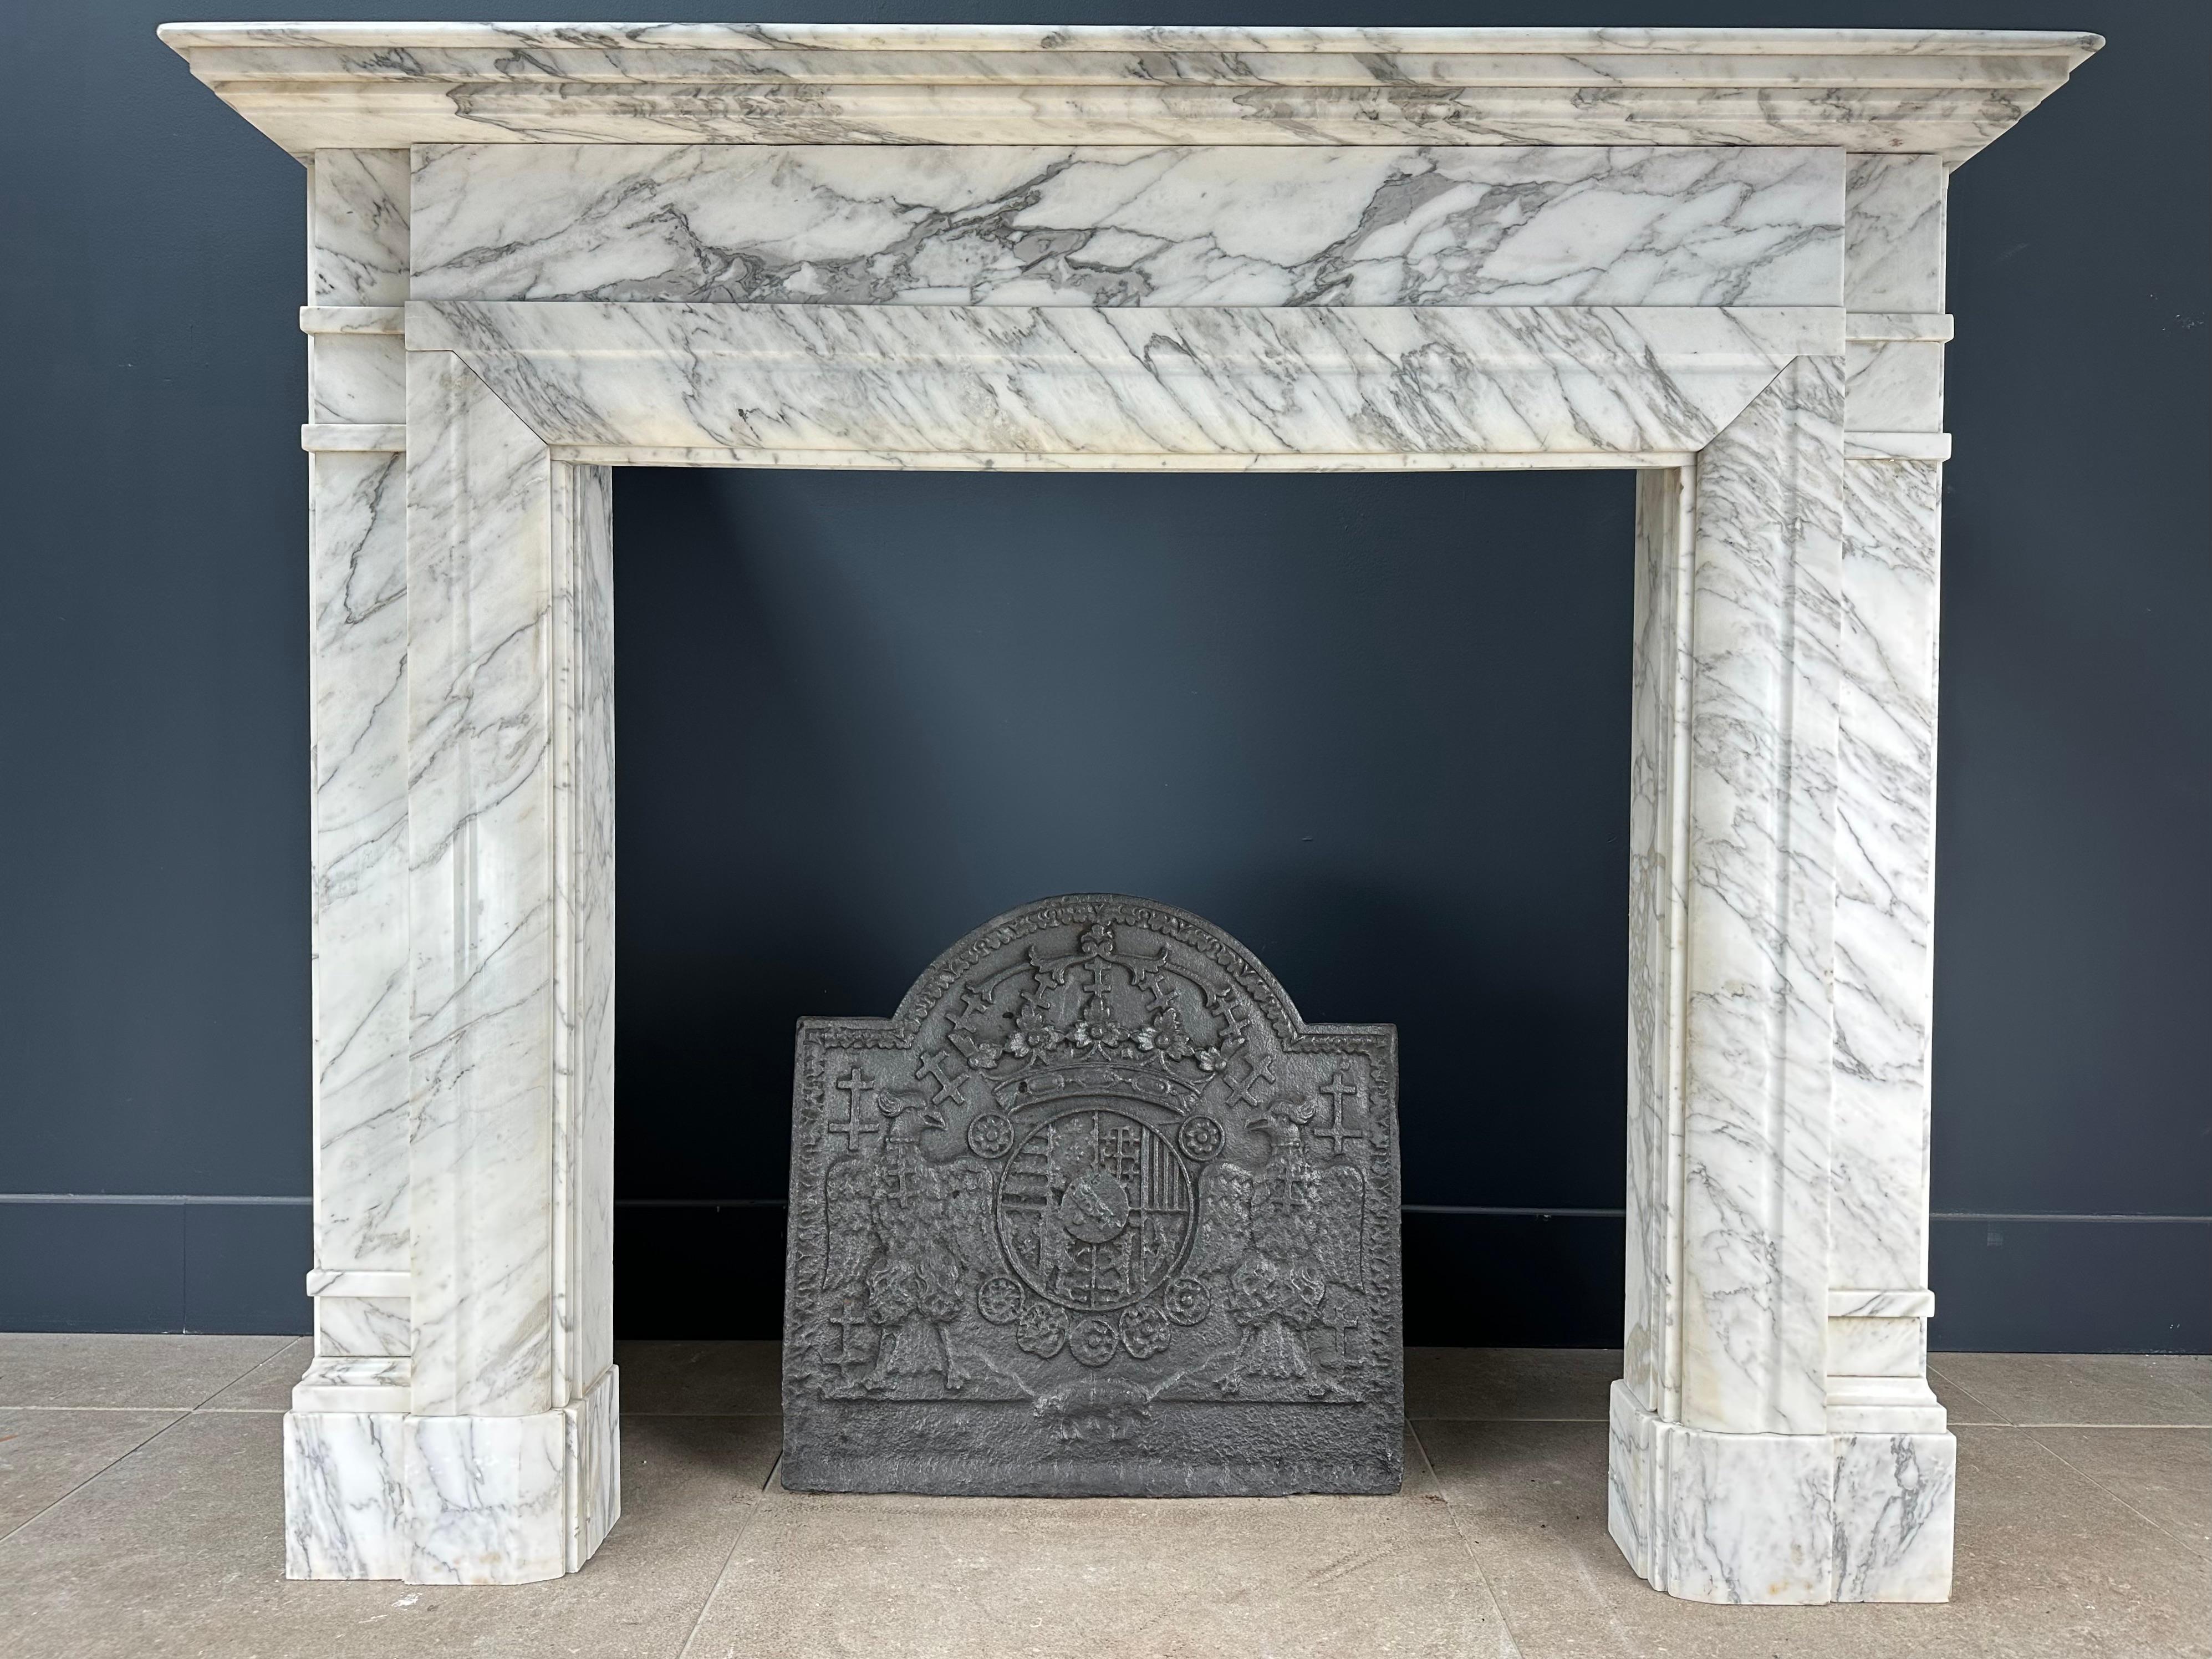 Beautiful l antique cast iron fireback. This fireback has a luxurious look. The fireback can be placed in a working fireplace against the fire wall or placed as a style item in an antique fireplace.

Weight: 22 KG.